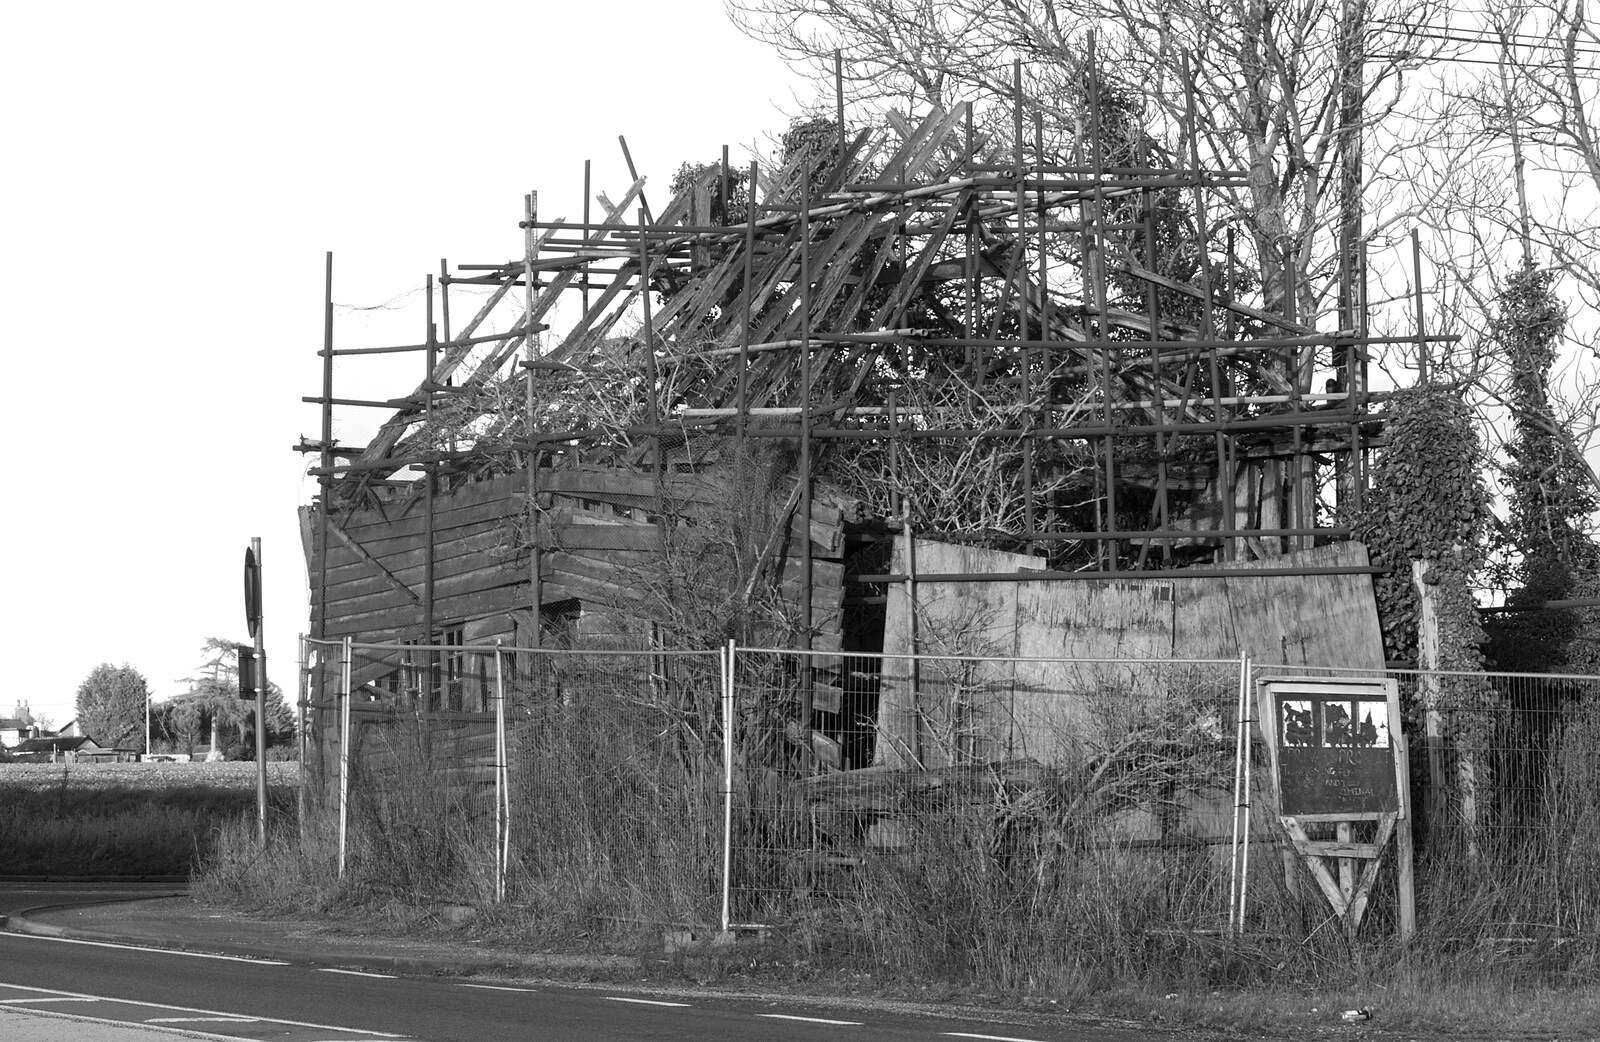 The remains of a building on the Stoke Ash crossroads from New Year's Day and Lunch at the White Horse, Ipswich, Finningham and Brome - 1st January 2013